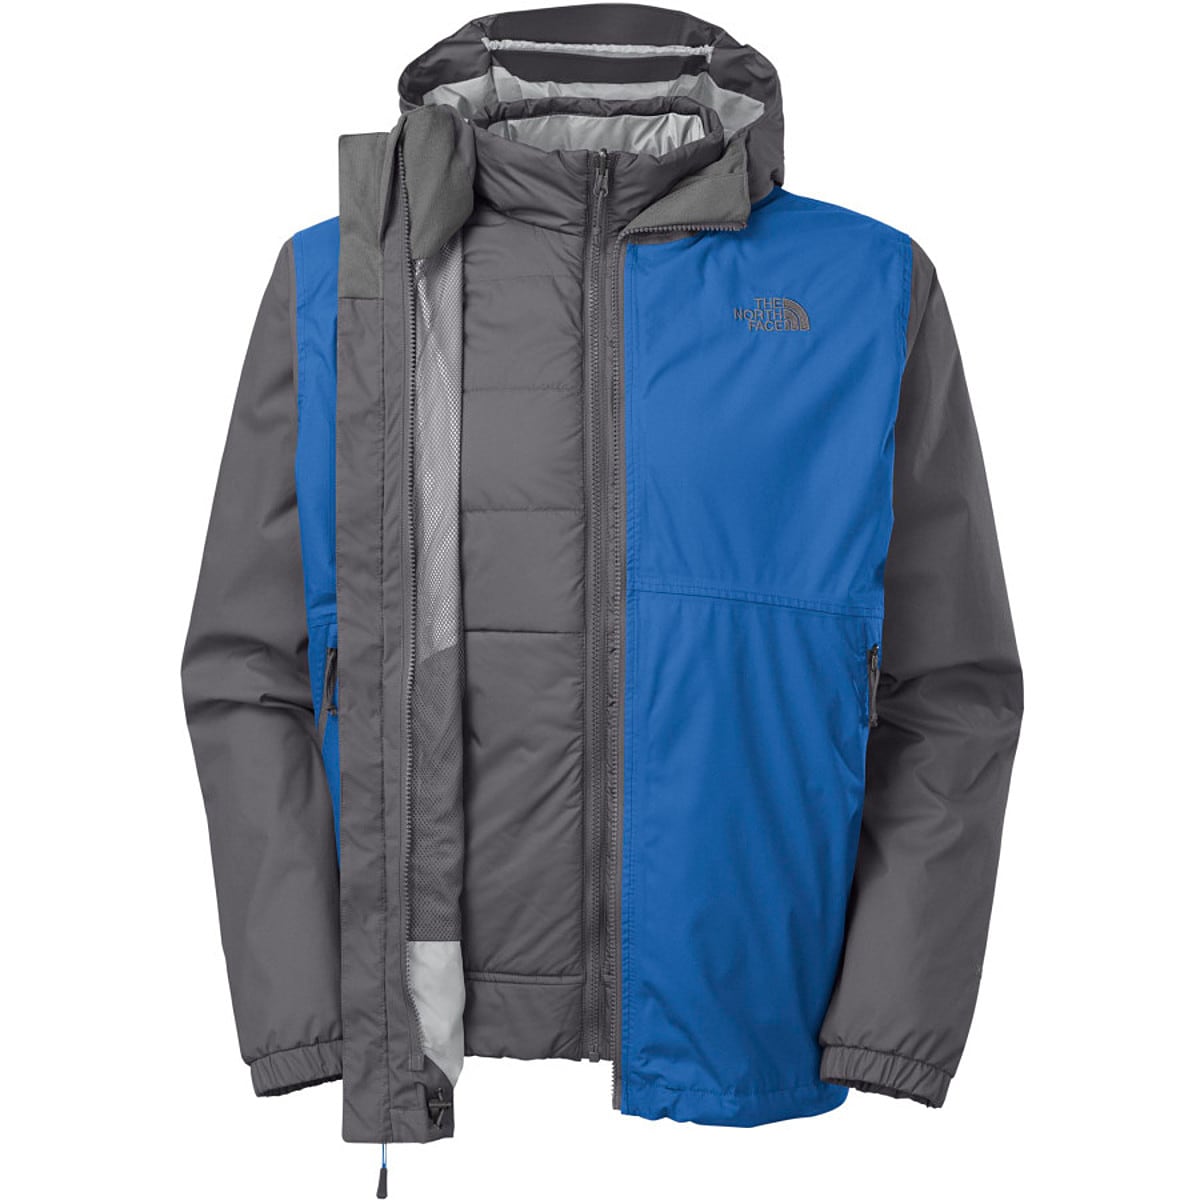 The North Face Apex Bionic TriClimate Jacket - Trailspace.com